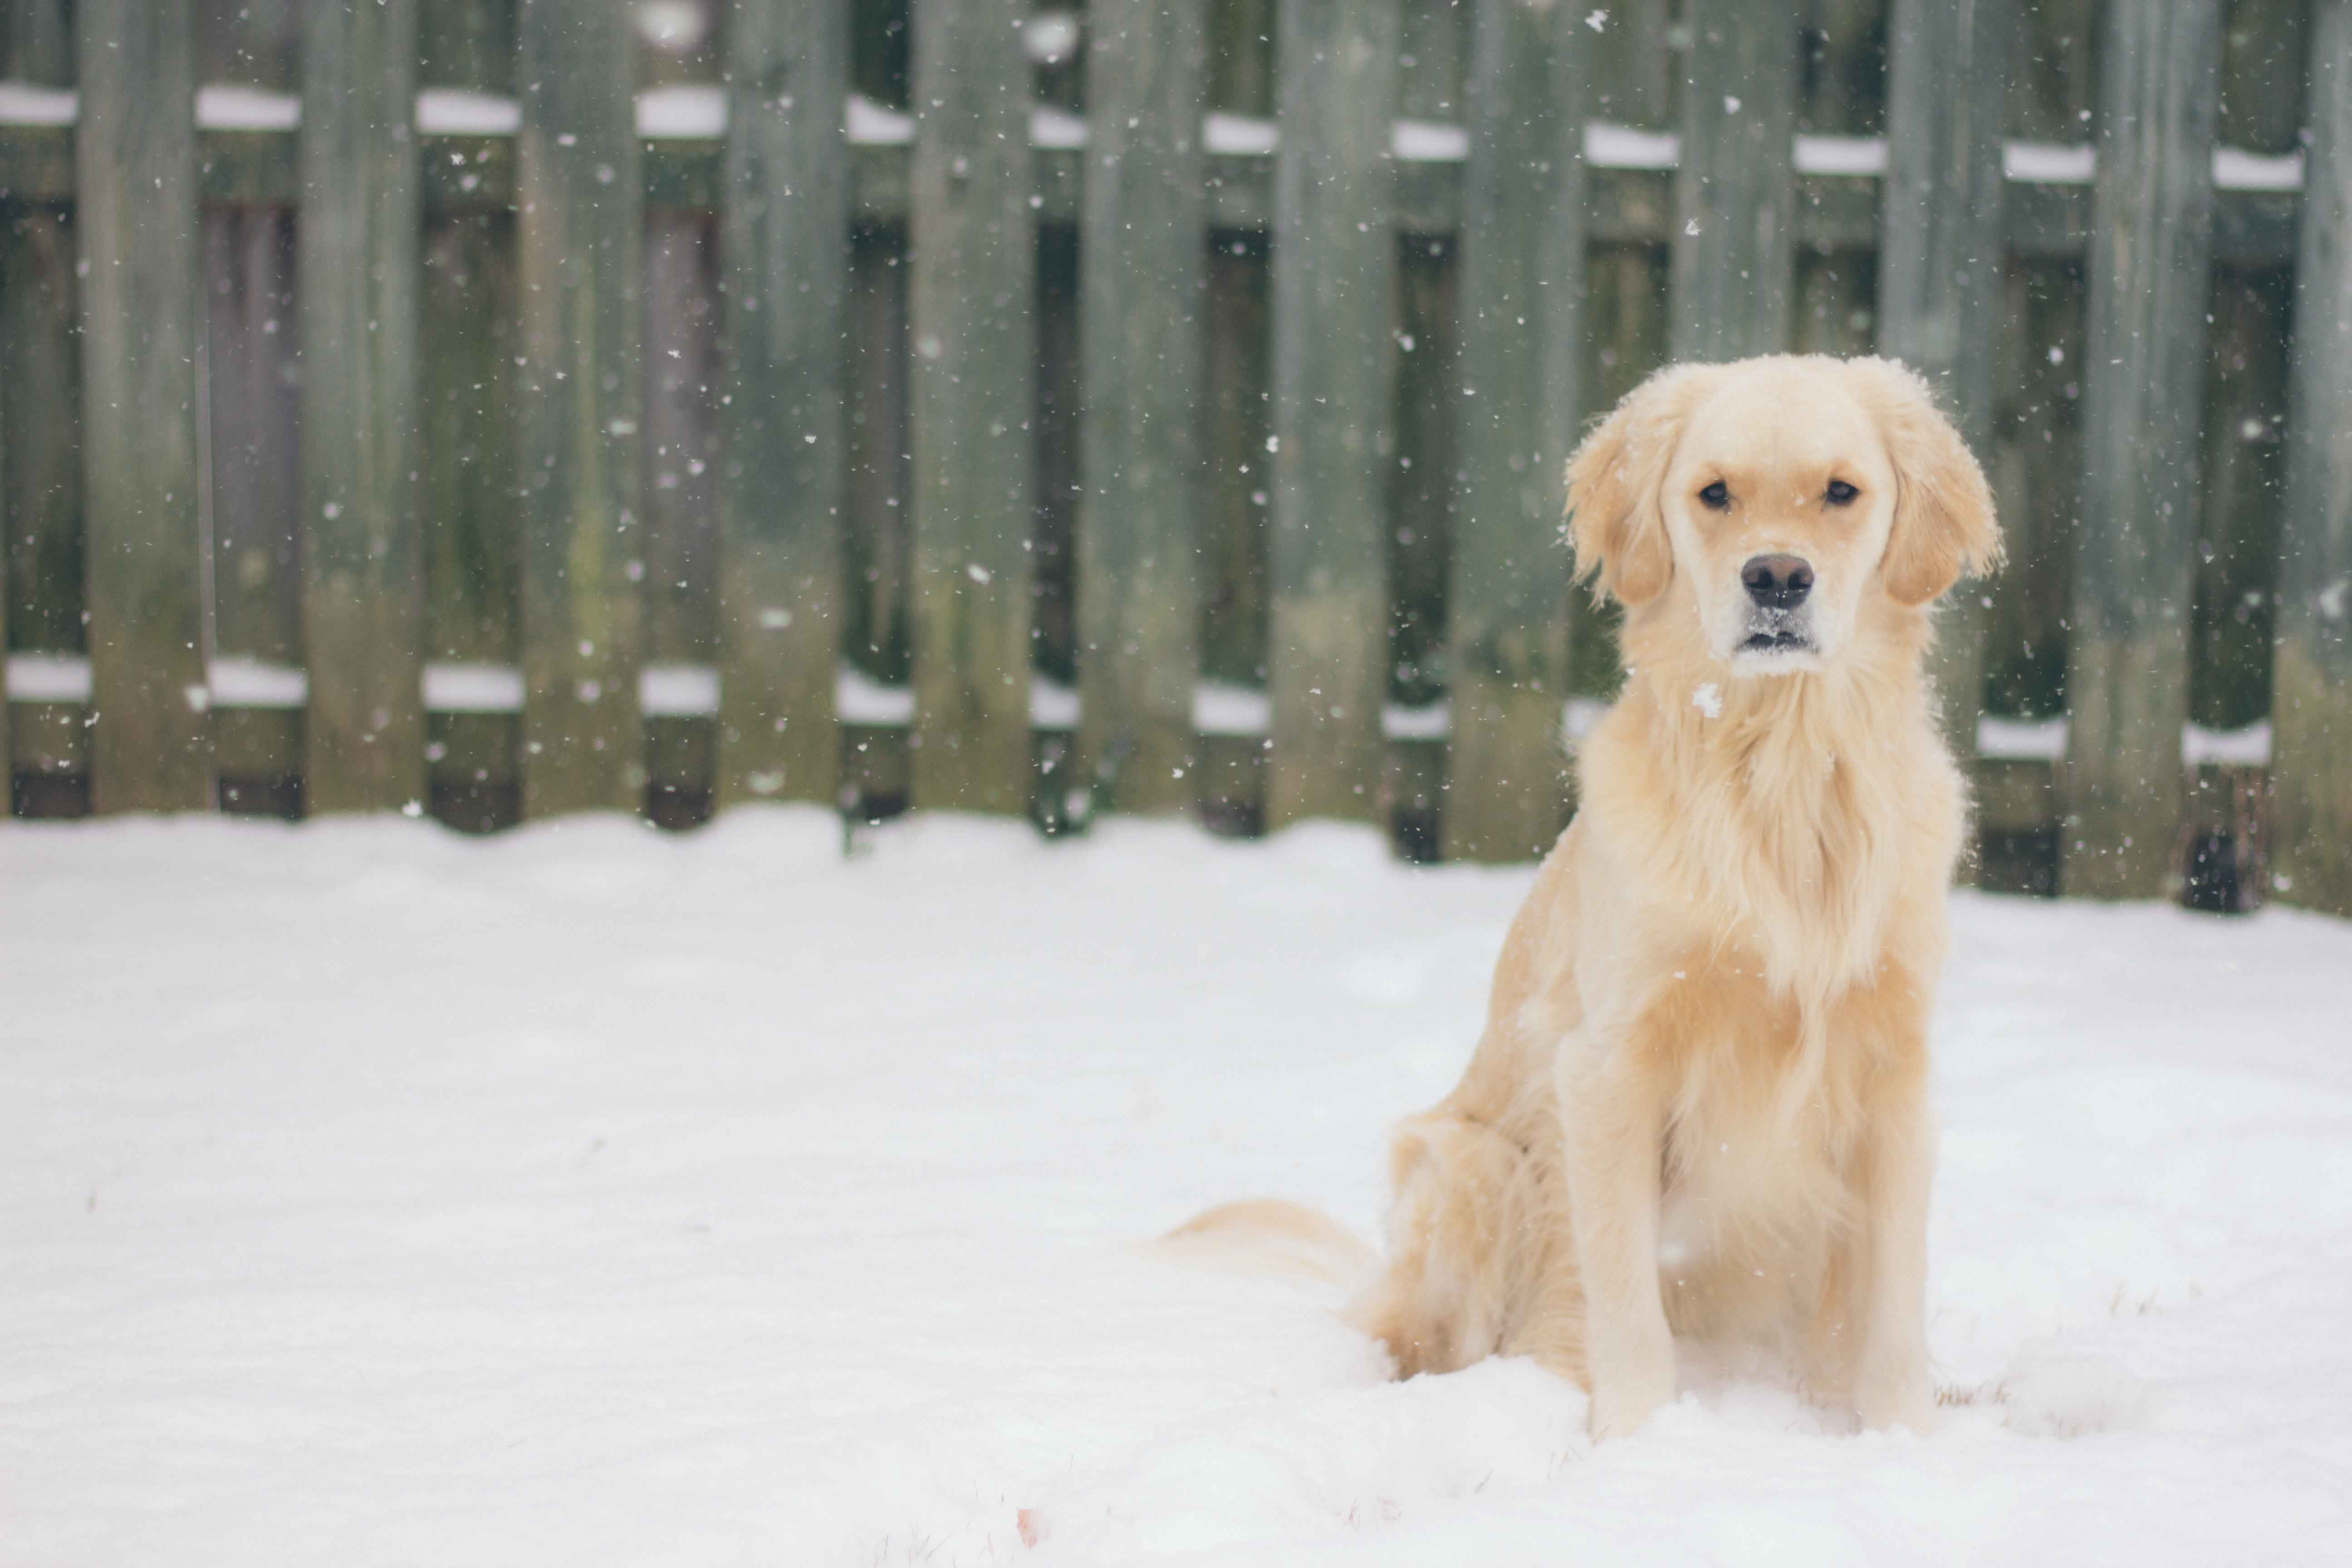 How can I prevent my Golden Retriever from developing diabetes?